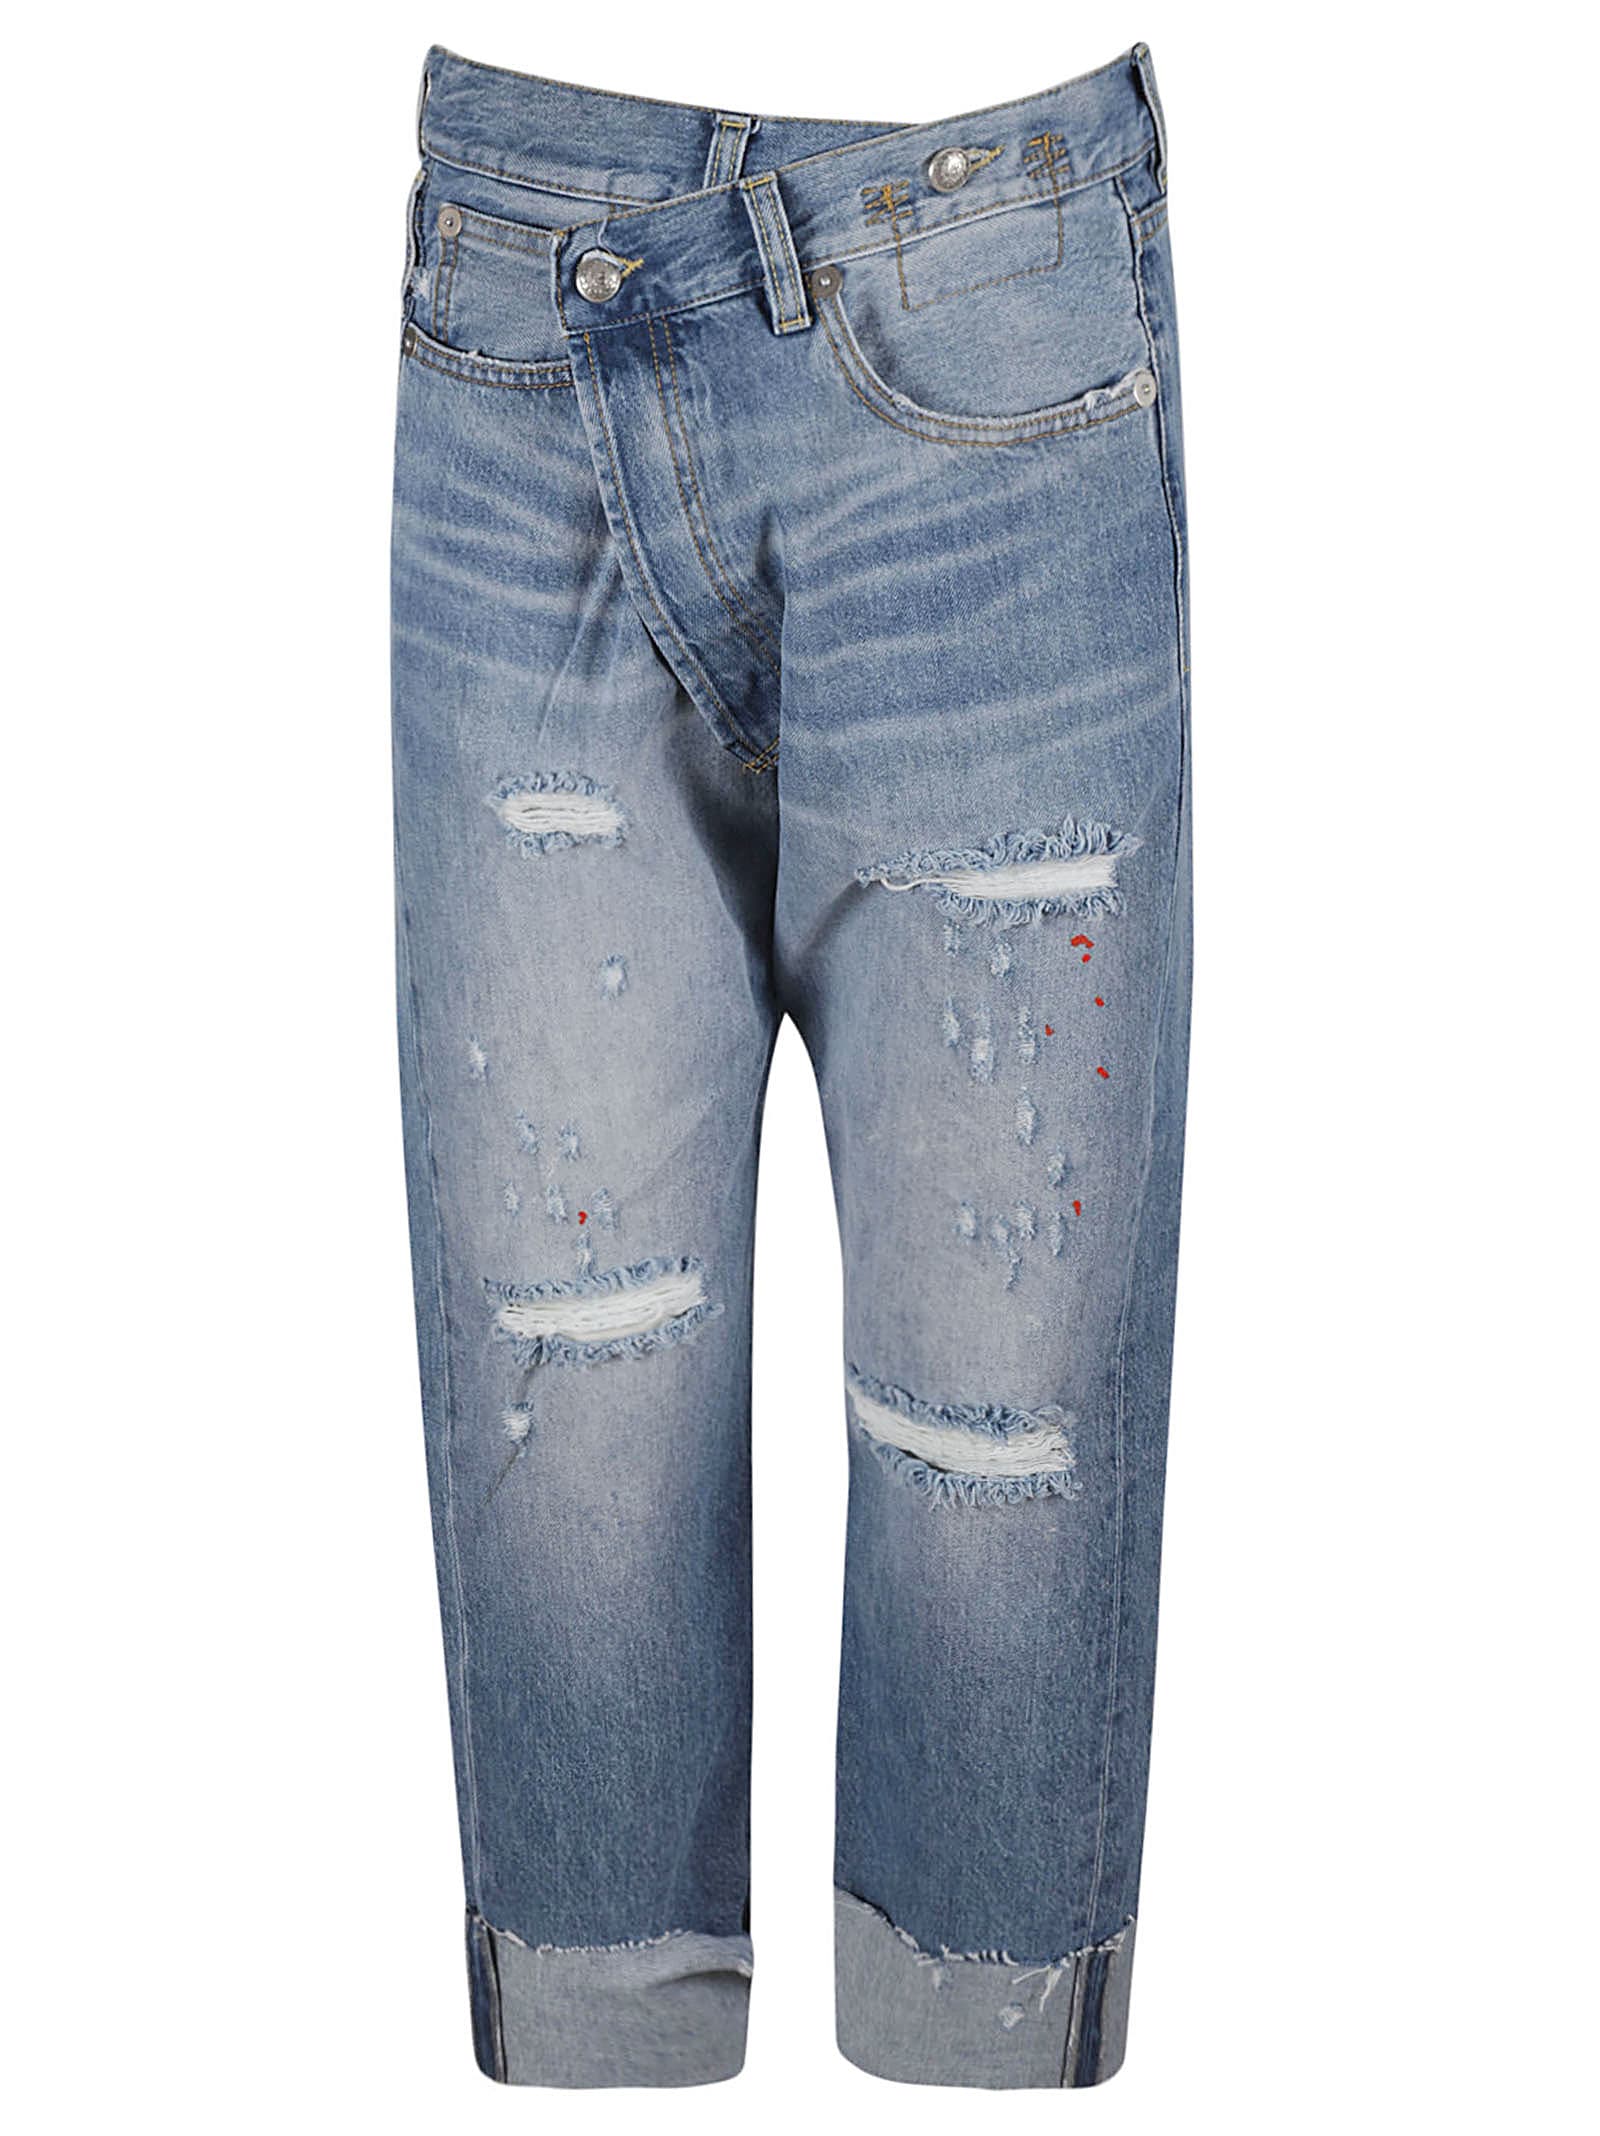 R13 Cross-over Jeans In Emory | ModeSens